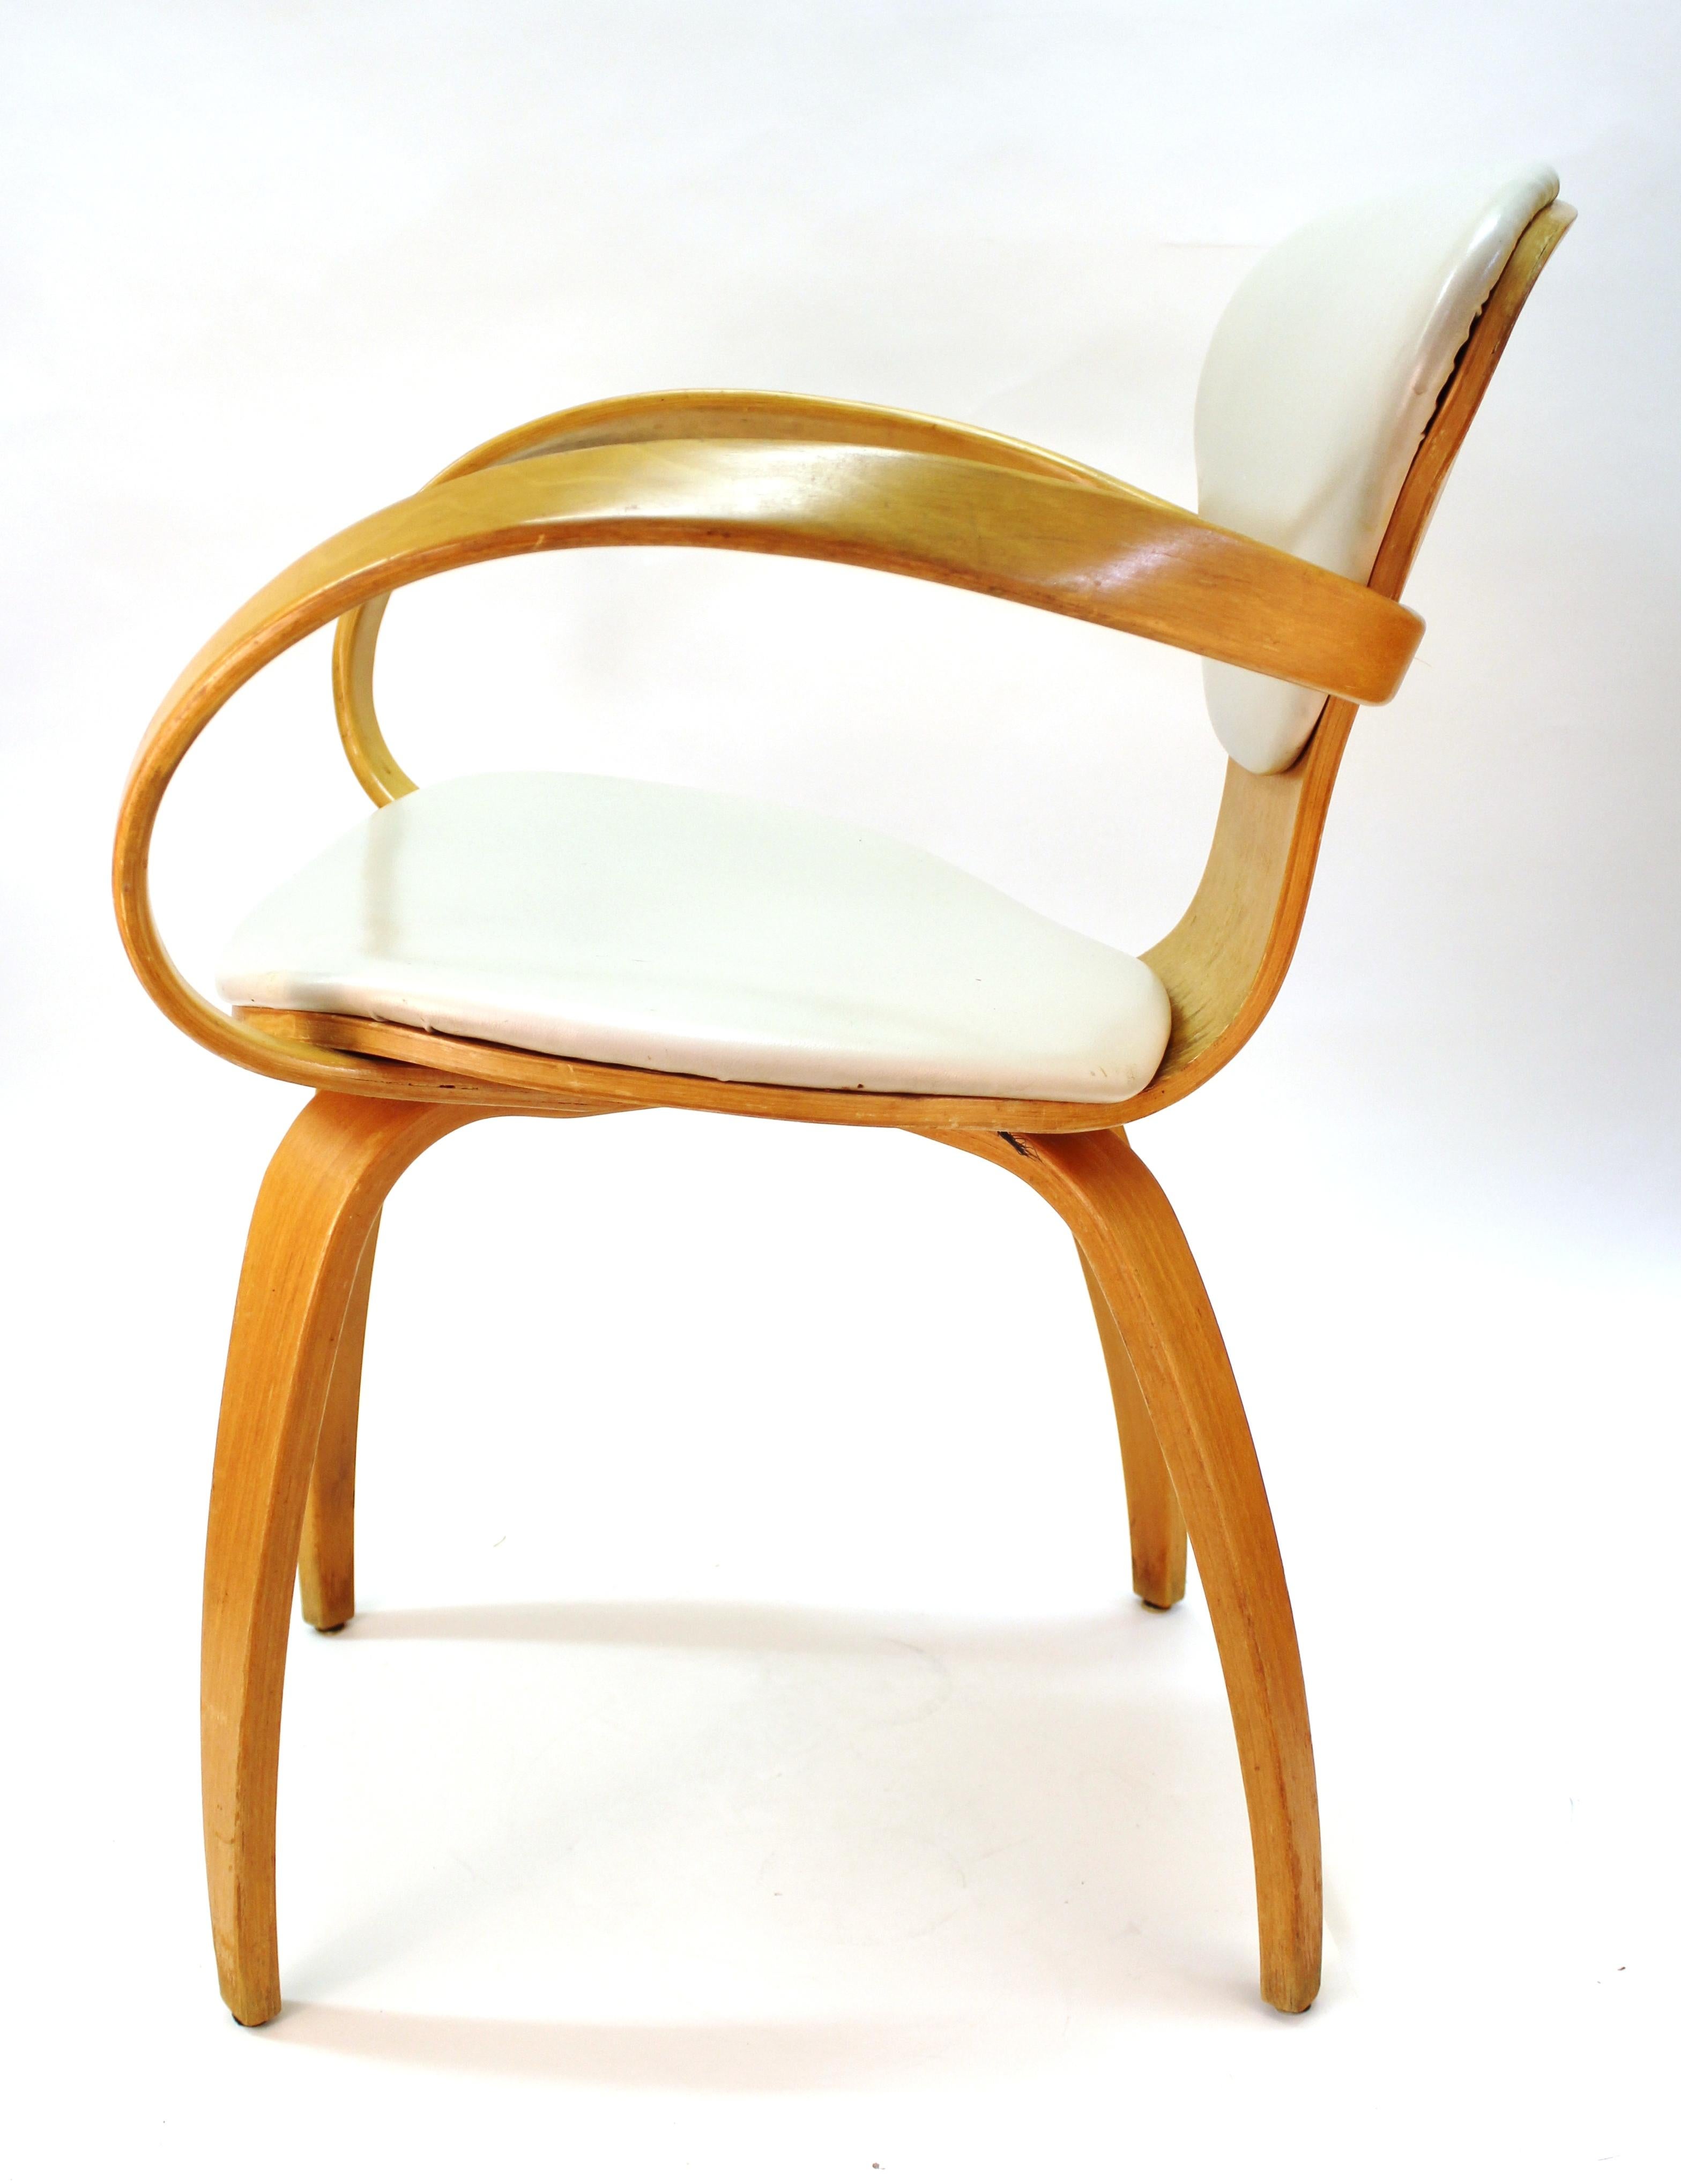 Mid-20th Century Norman Cherner for Plycraft Mid-Century Modern Dining Room Chairs